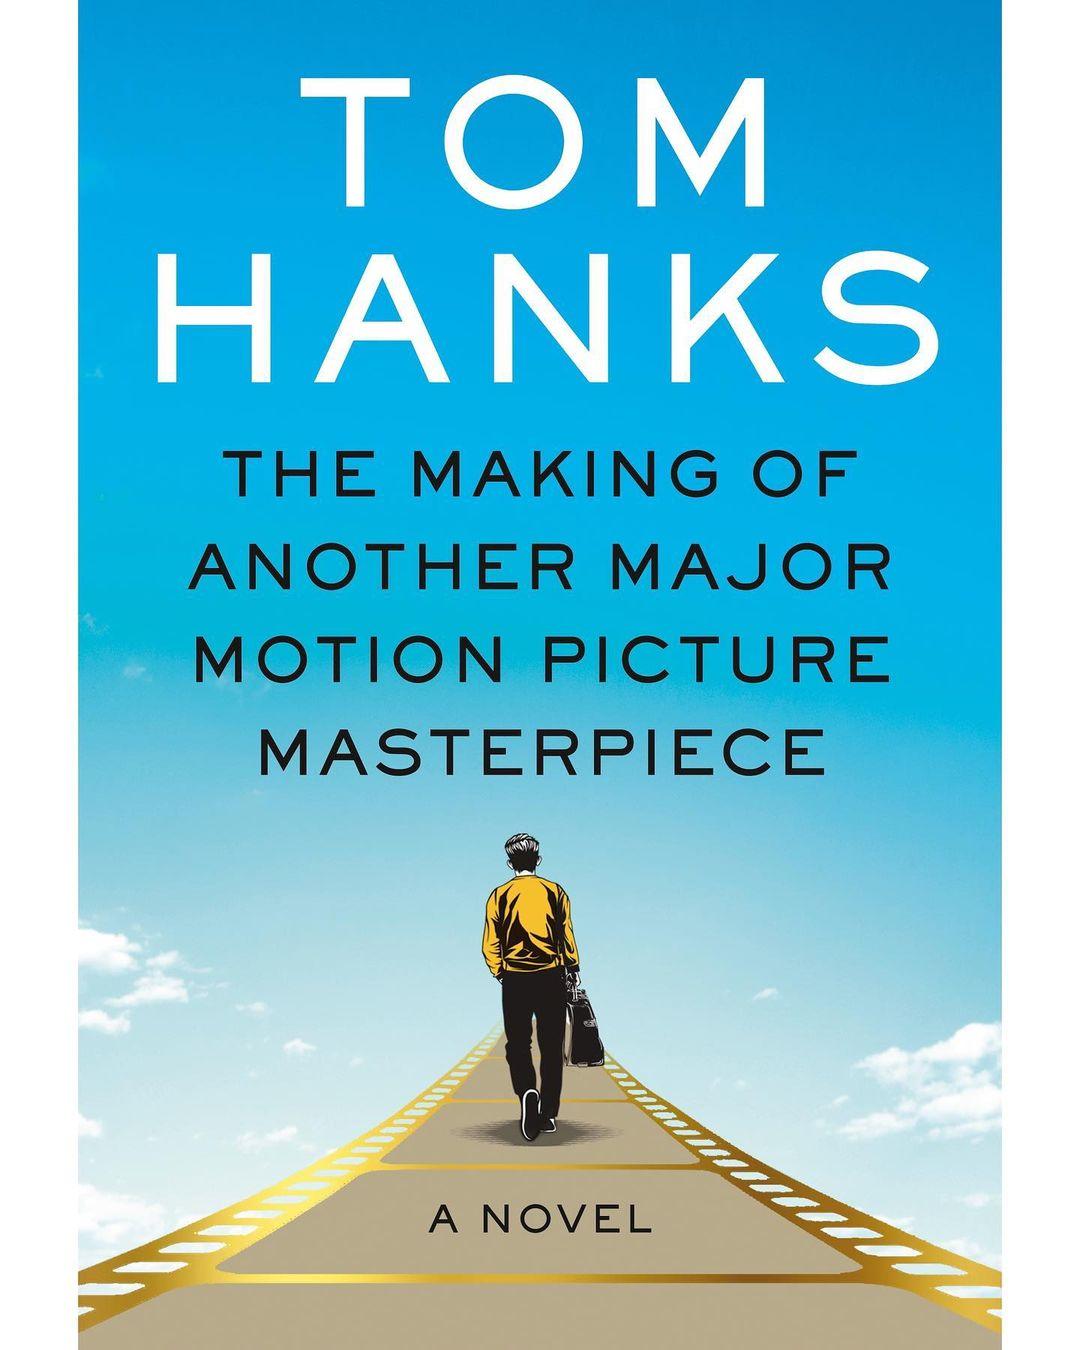 Cover of Tom Hanks' new book, "The Making Of Another Major Motion Picture Masterpiece"